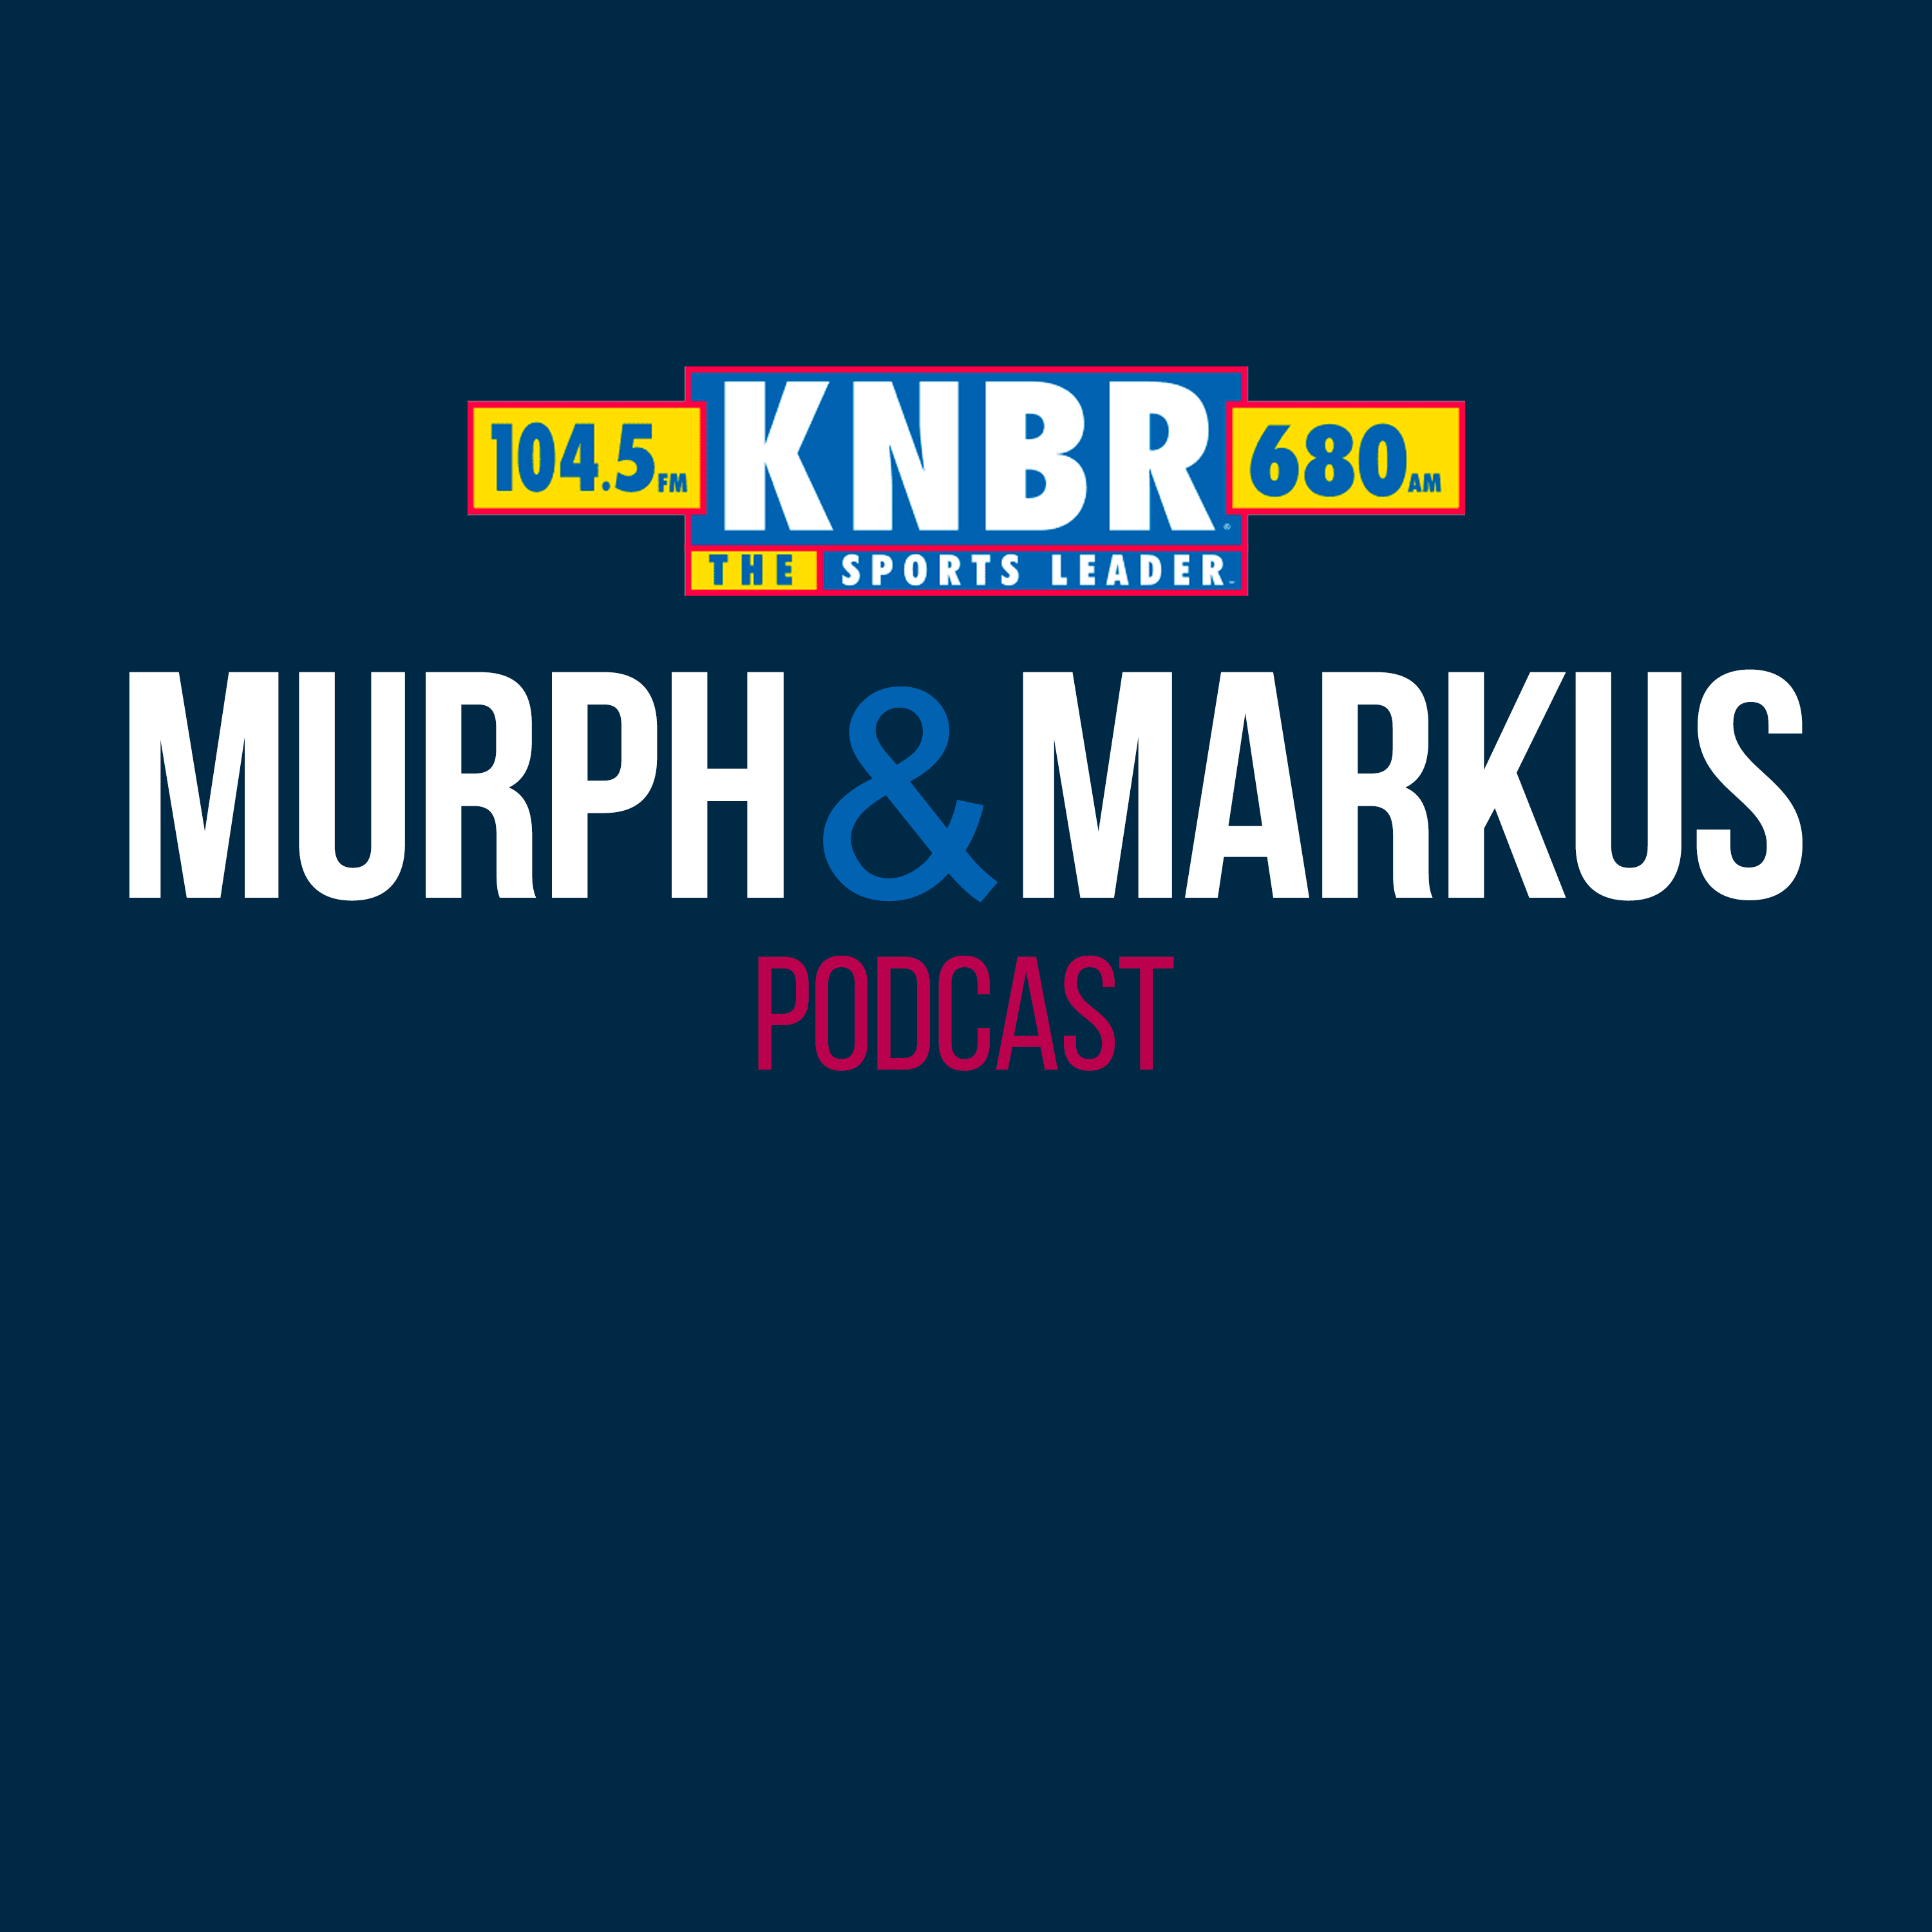 7-11 Hour 1: Murph & Markus discuss the Giants losing to the Blue Jays, react to the in-game Blake Snell interview, and share their thoughts on the release of Receiver on Netflix